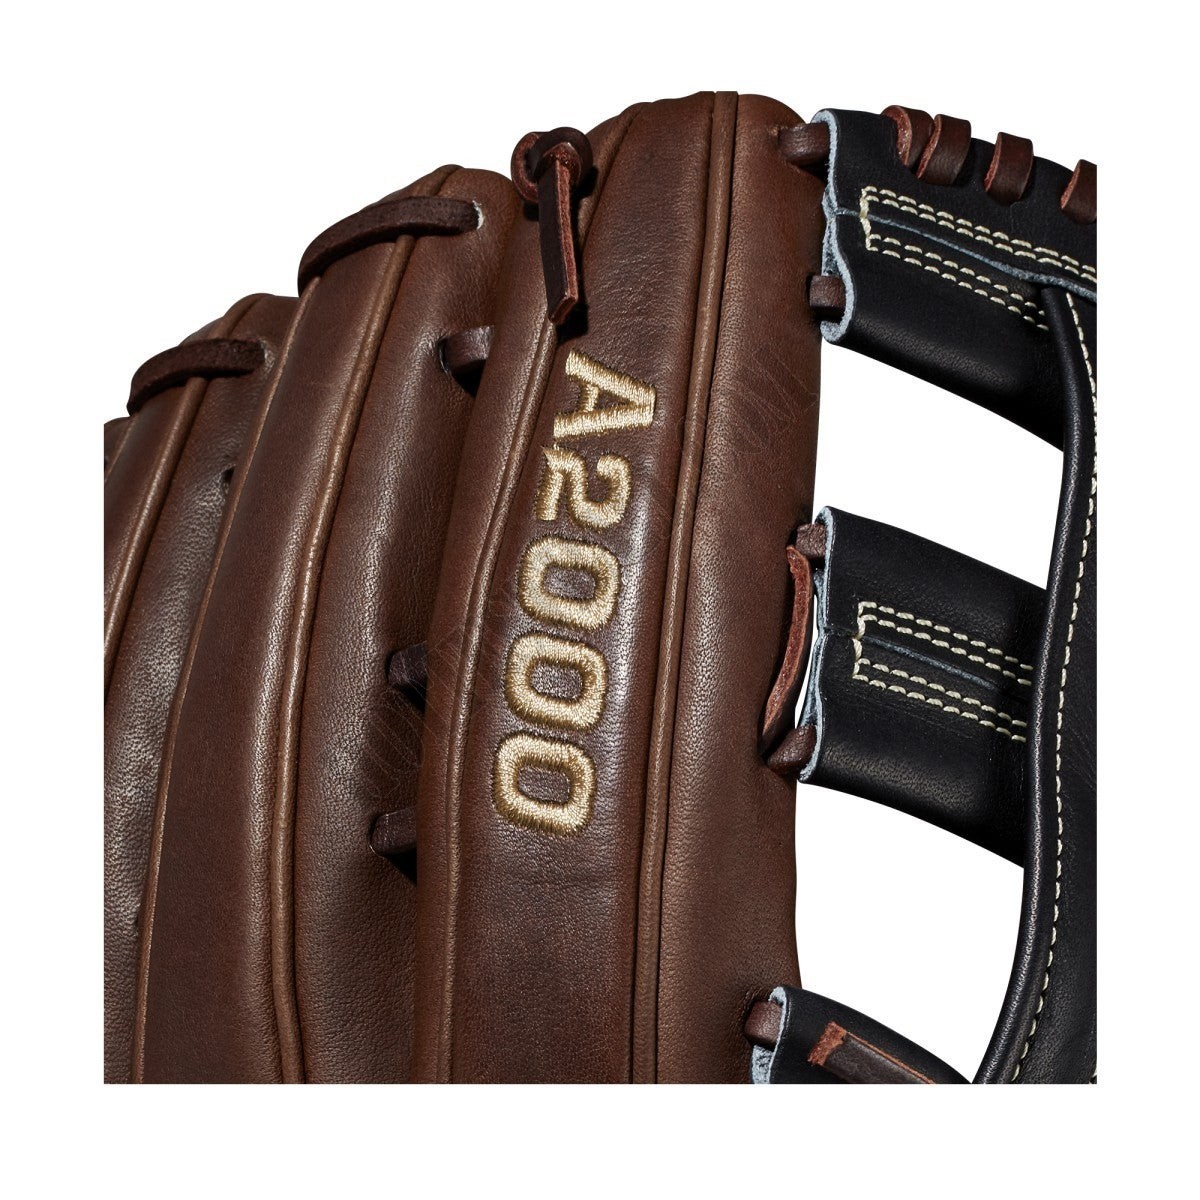 2020 A2000 1799 12.75" Outfield Baseball Glove ● Wilson Promotions - -6